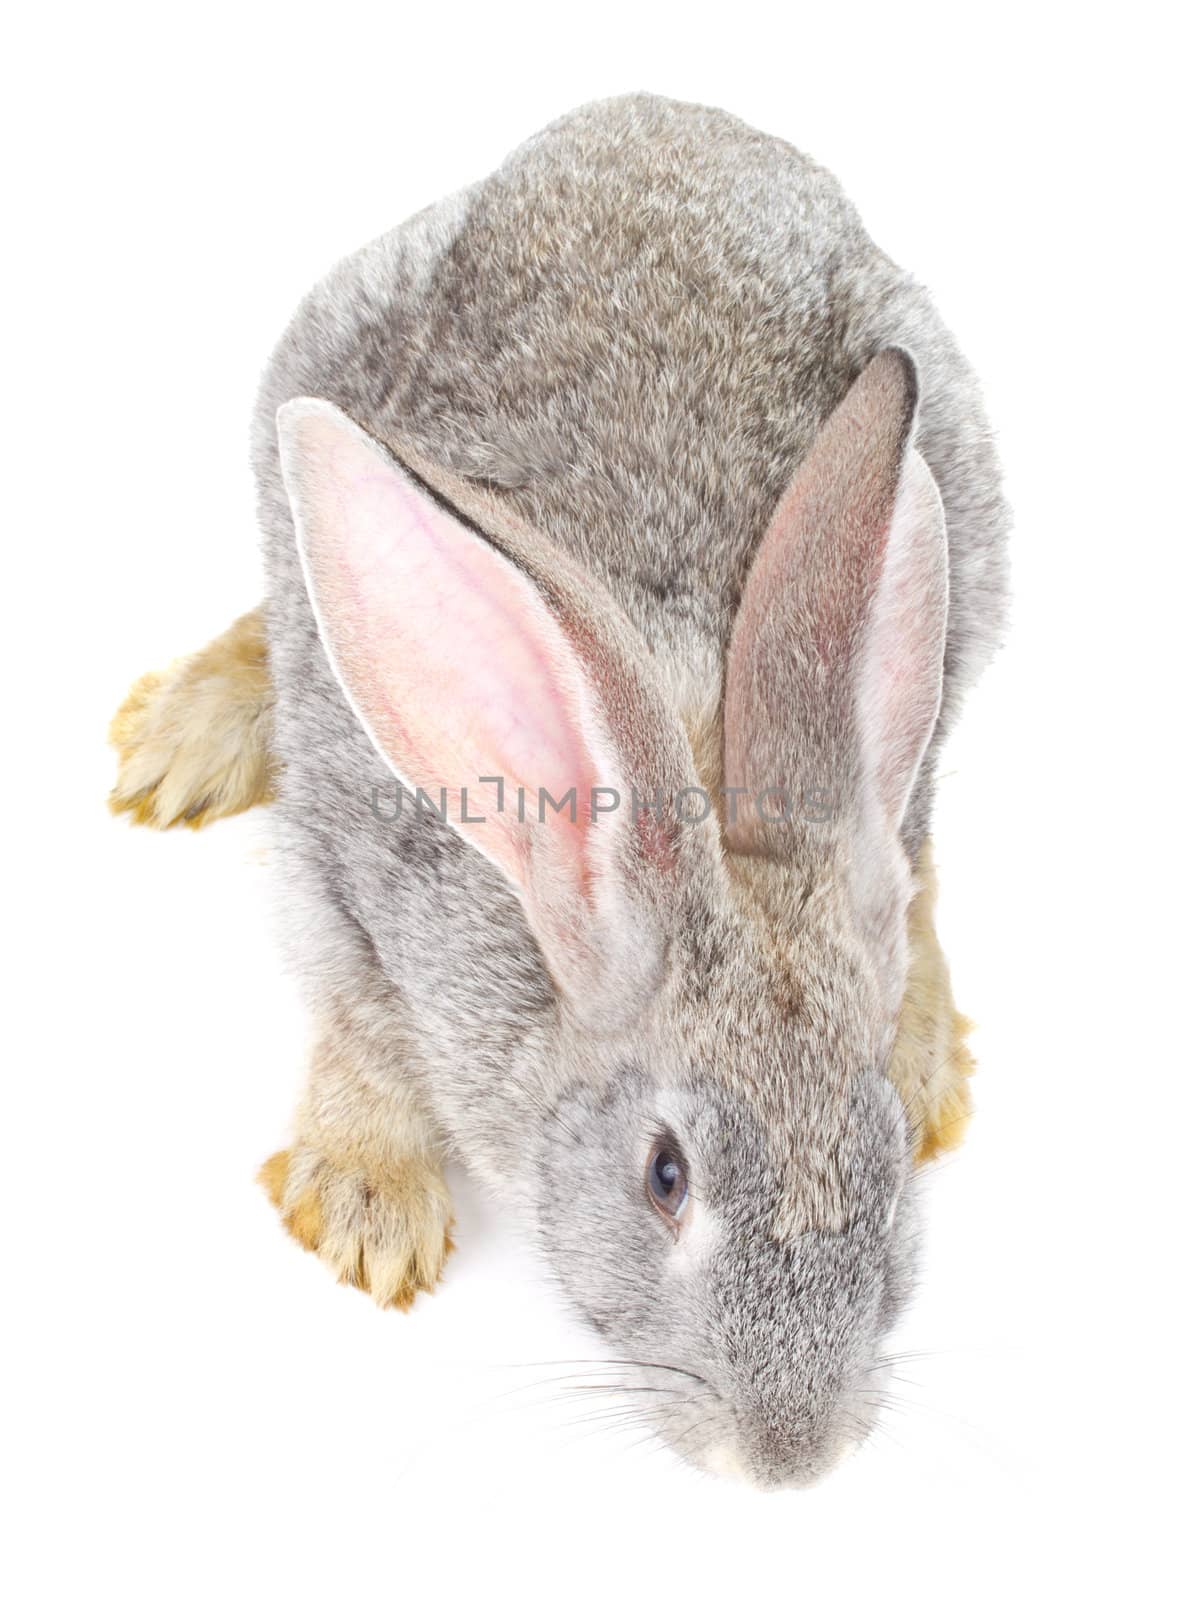 close-up gray rabbit view from above, isolated on white